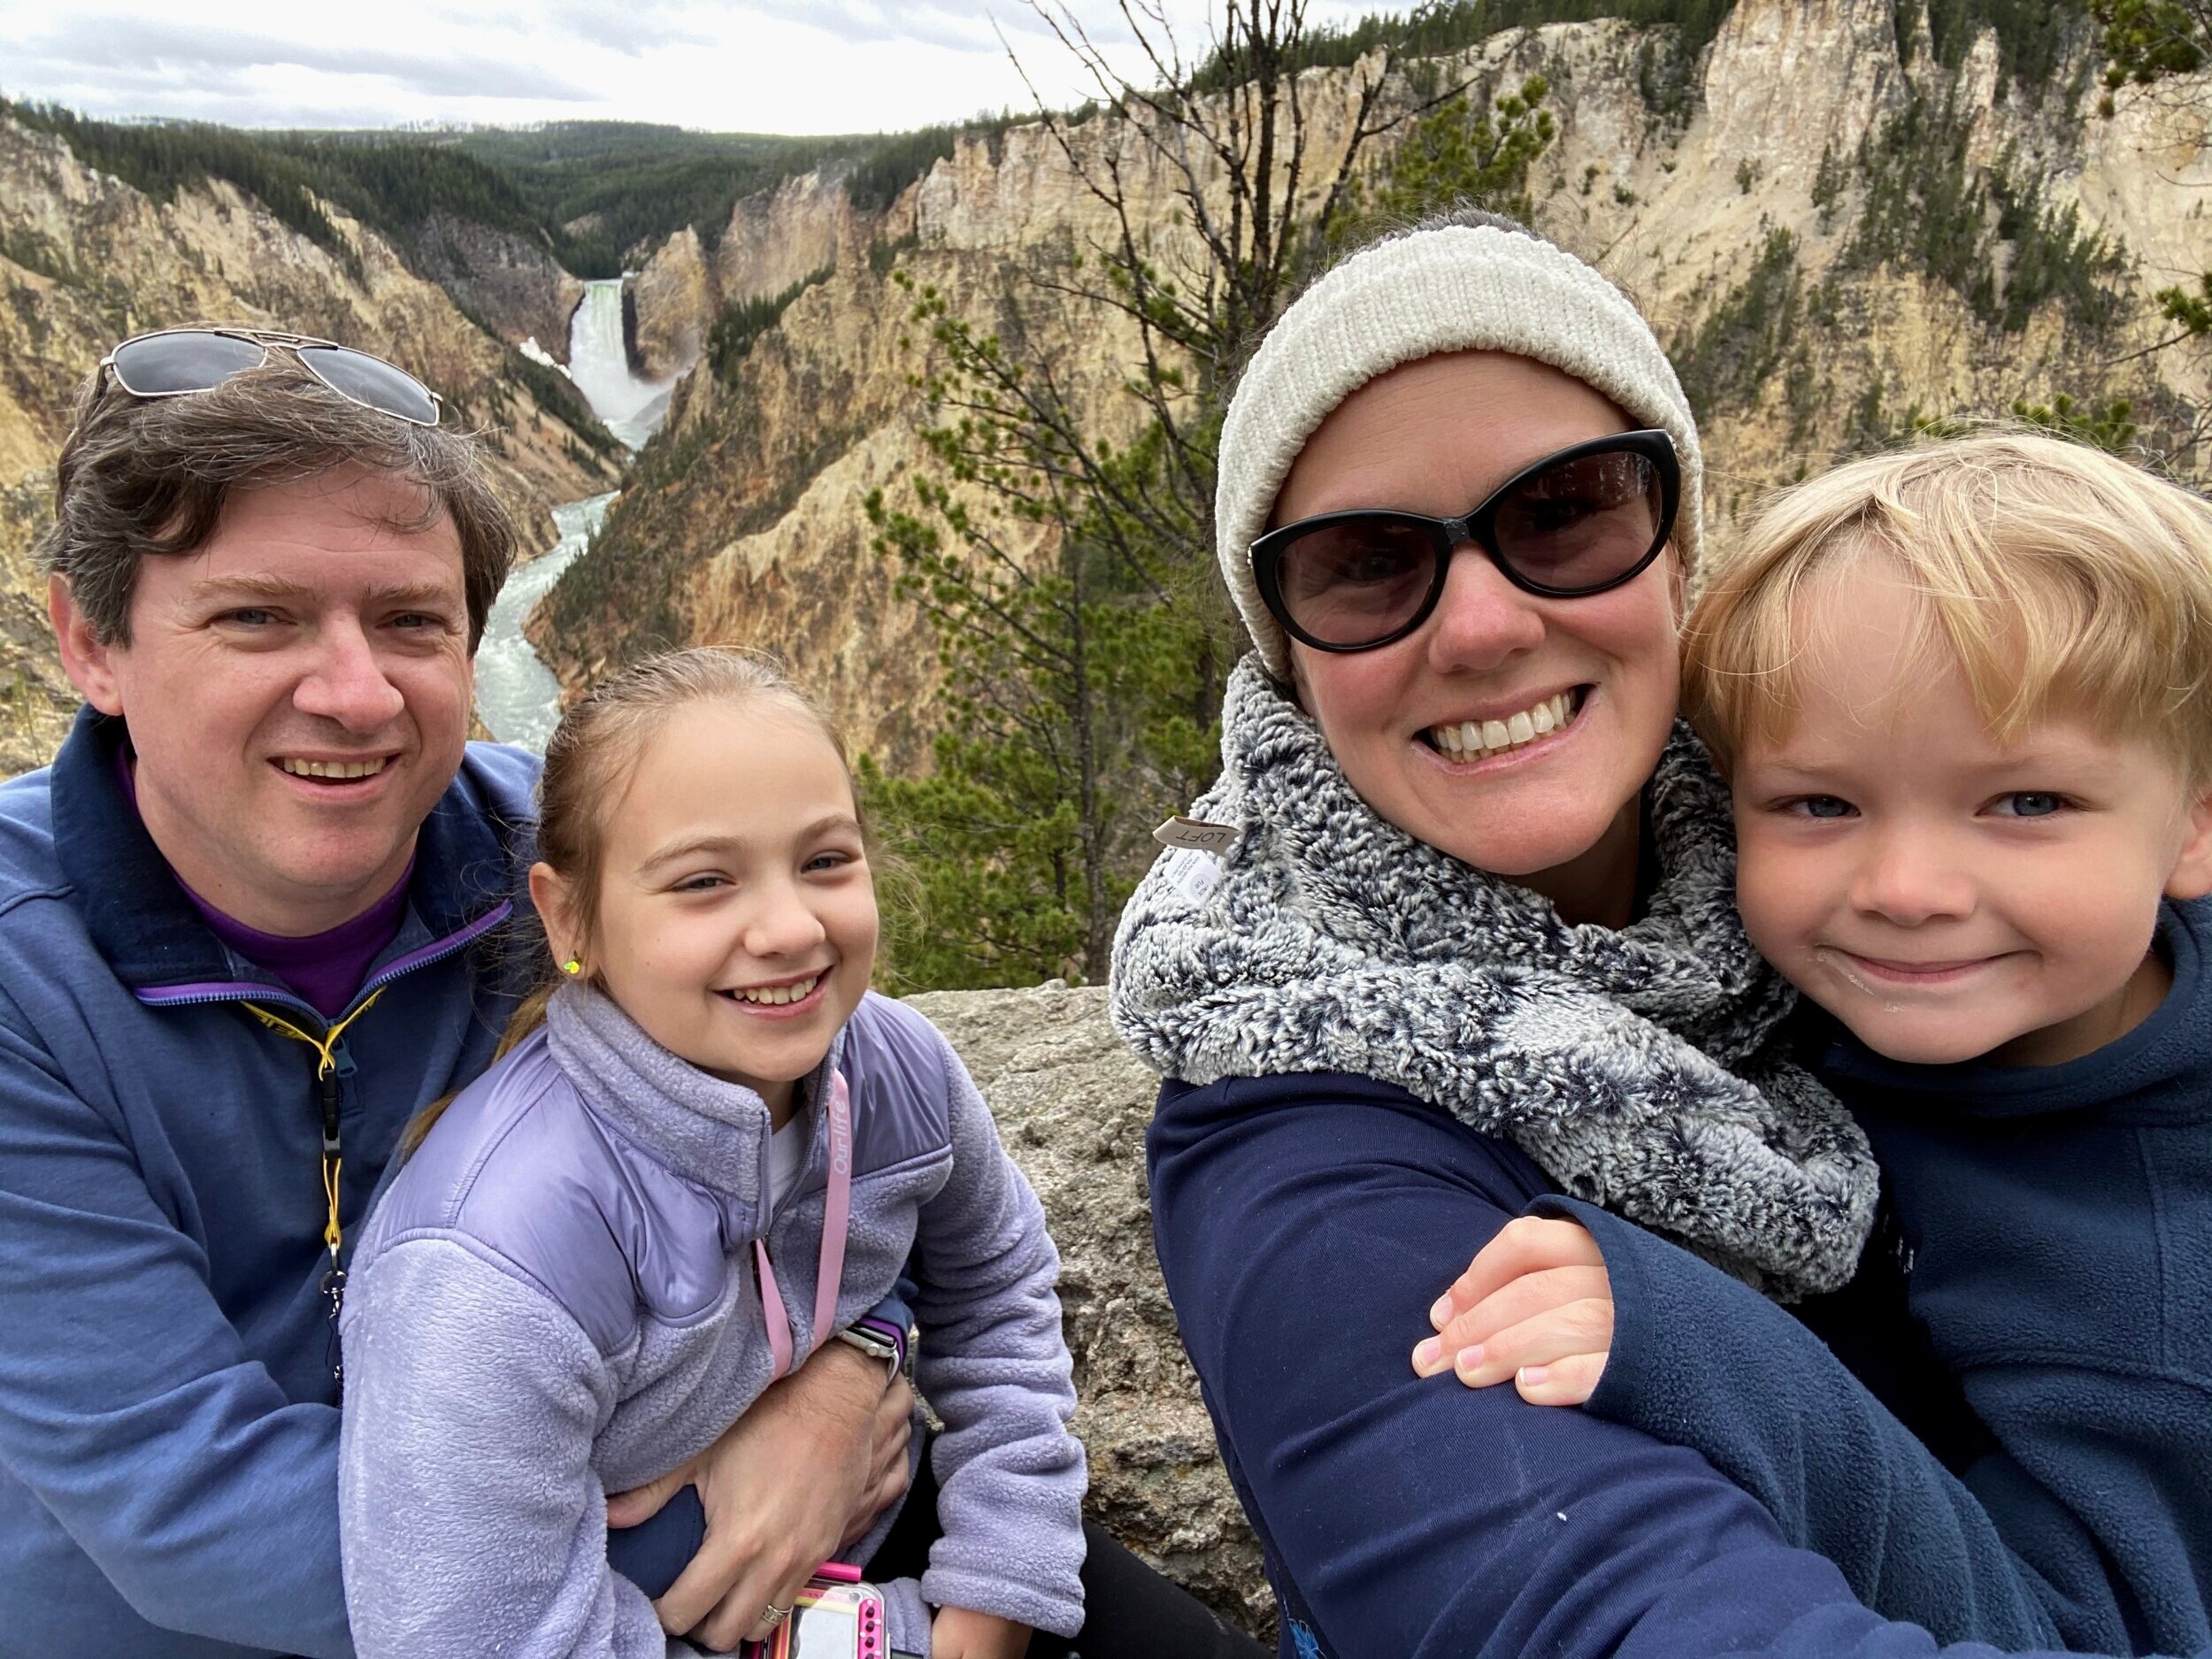 Yay!  I just figured out how to change the picture and put up a picture that is actually us.  This is our family at the Grand Canyon of Yellowstone.  We look forward to getting to know you on this journey!